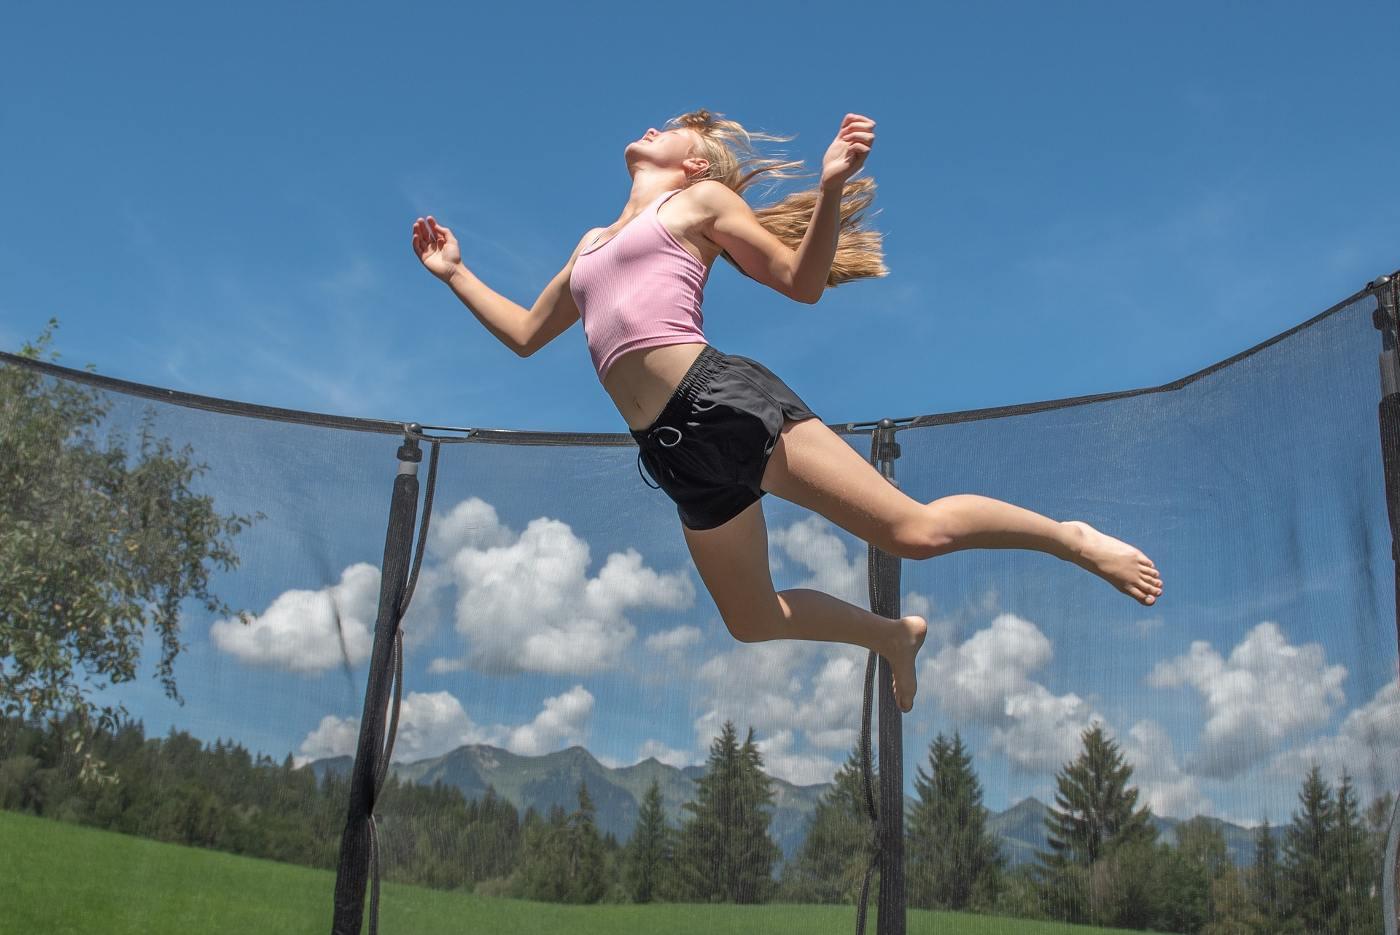 Girl jumping on trampoline with enclosure netting - How to Keep a Trampoline from Blowing Away: 7 Basic Steps